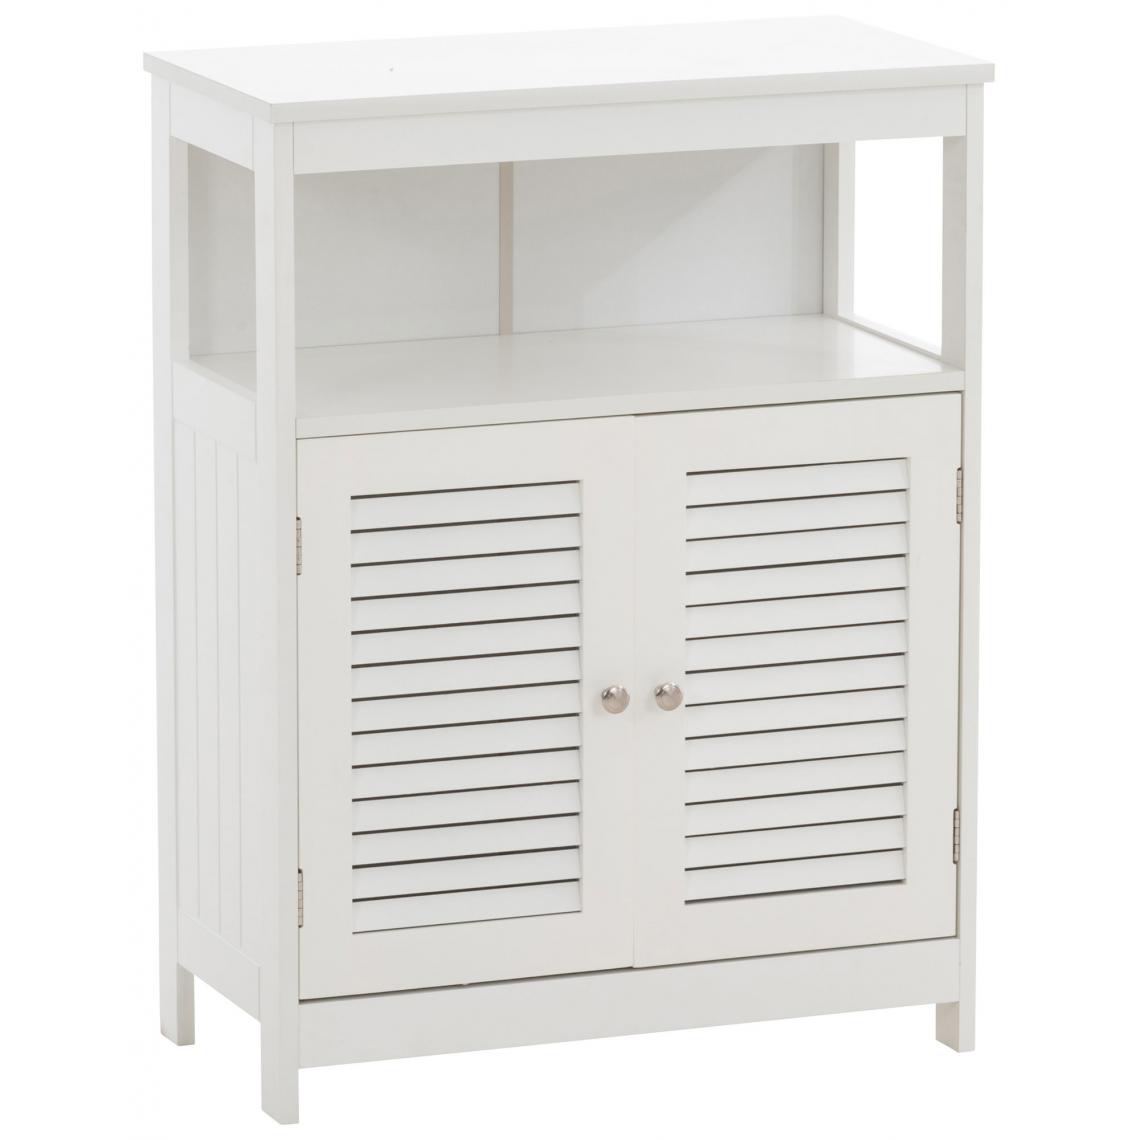 Icaverne - Moderne Commode gamme Kampala couleur blanc - Chaises